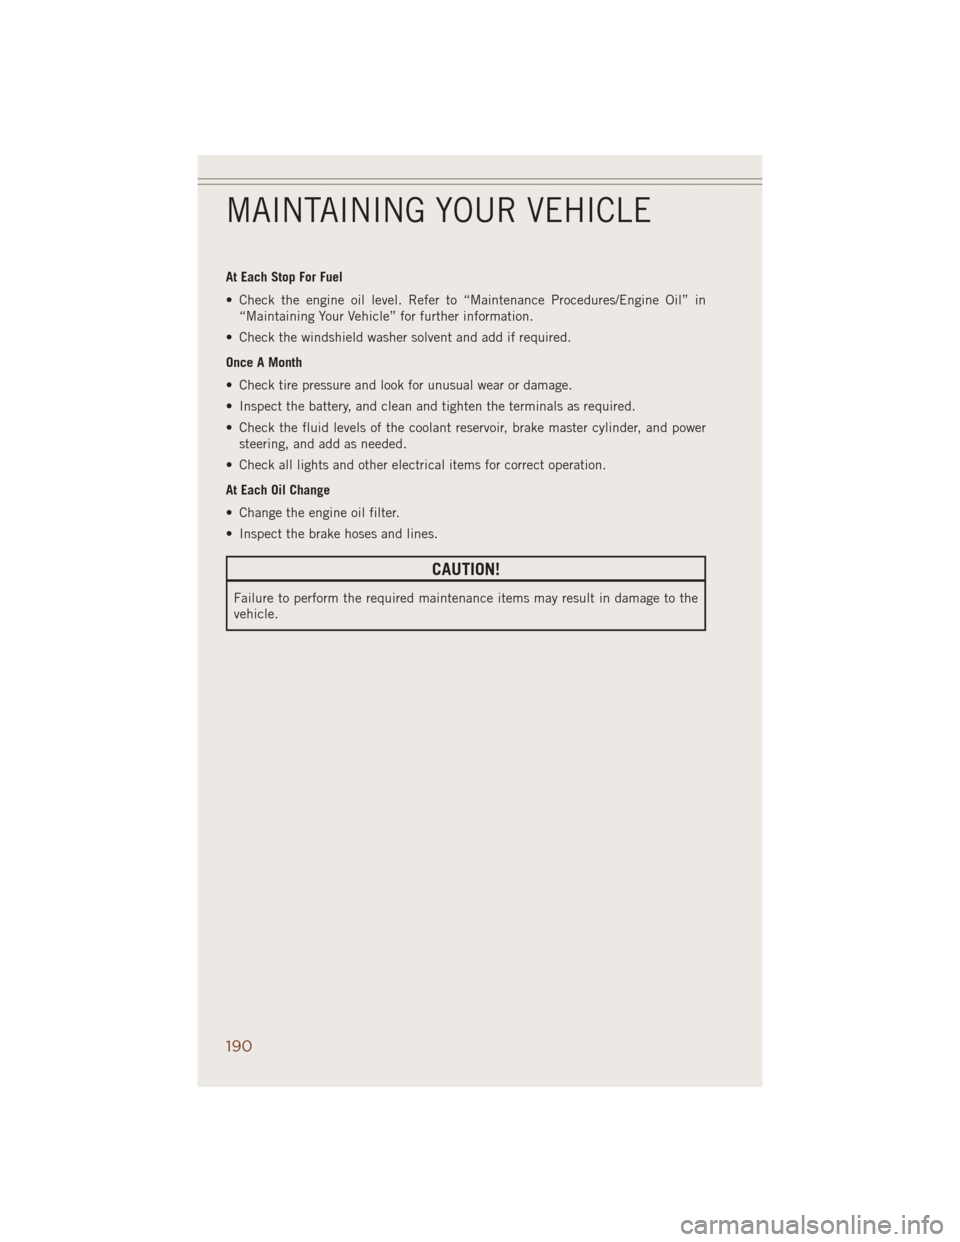 JEEP GRAND CHEROKEE 2014 WK2 / 4.G User Guide At Each Stop For Fuel
• Check the engine oil level. Refer to “Maintenance Procedures/Engine Oil” in
“Maintaining Your Vehicle” for further information.
• Check the windshield washer solven